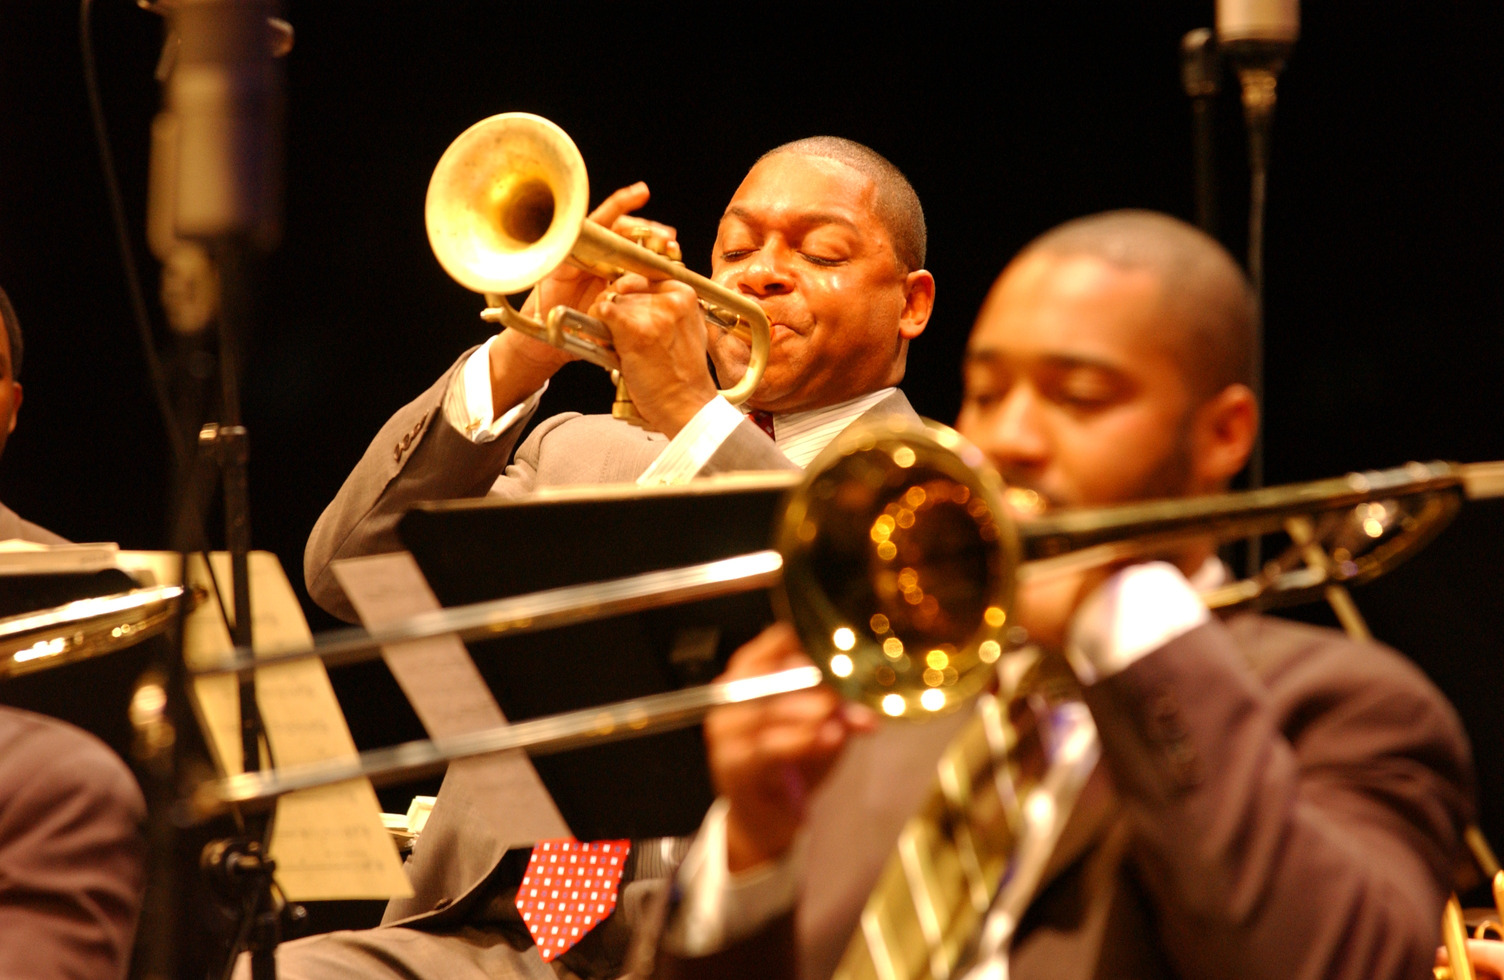 Wynton Marsalis playing trumpet, with another musician playing trombone in the foreground.